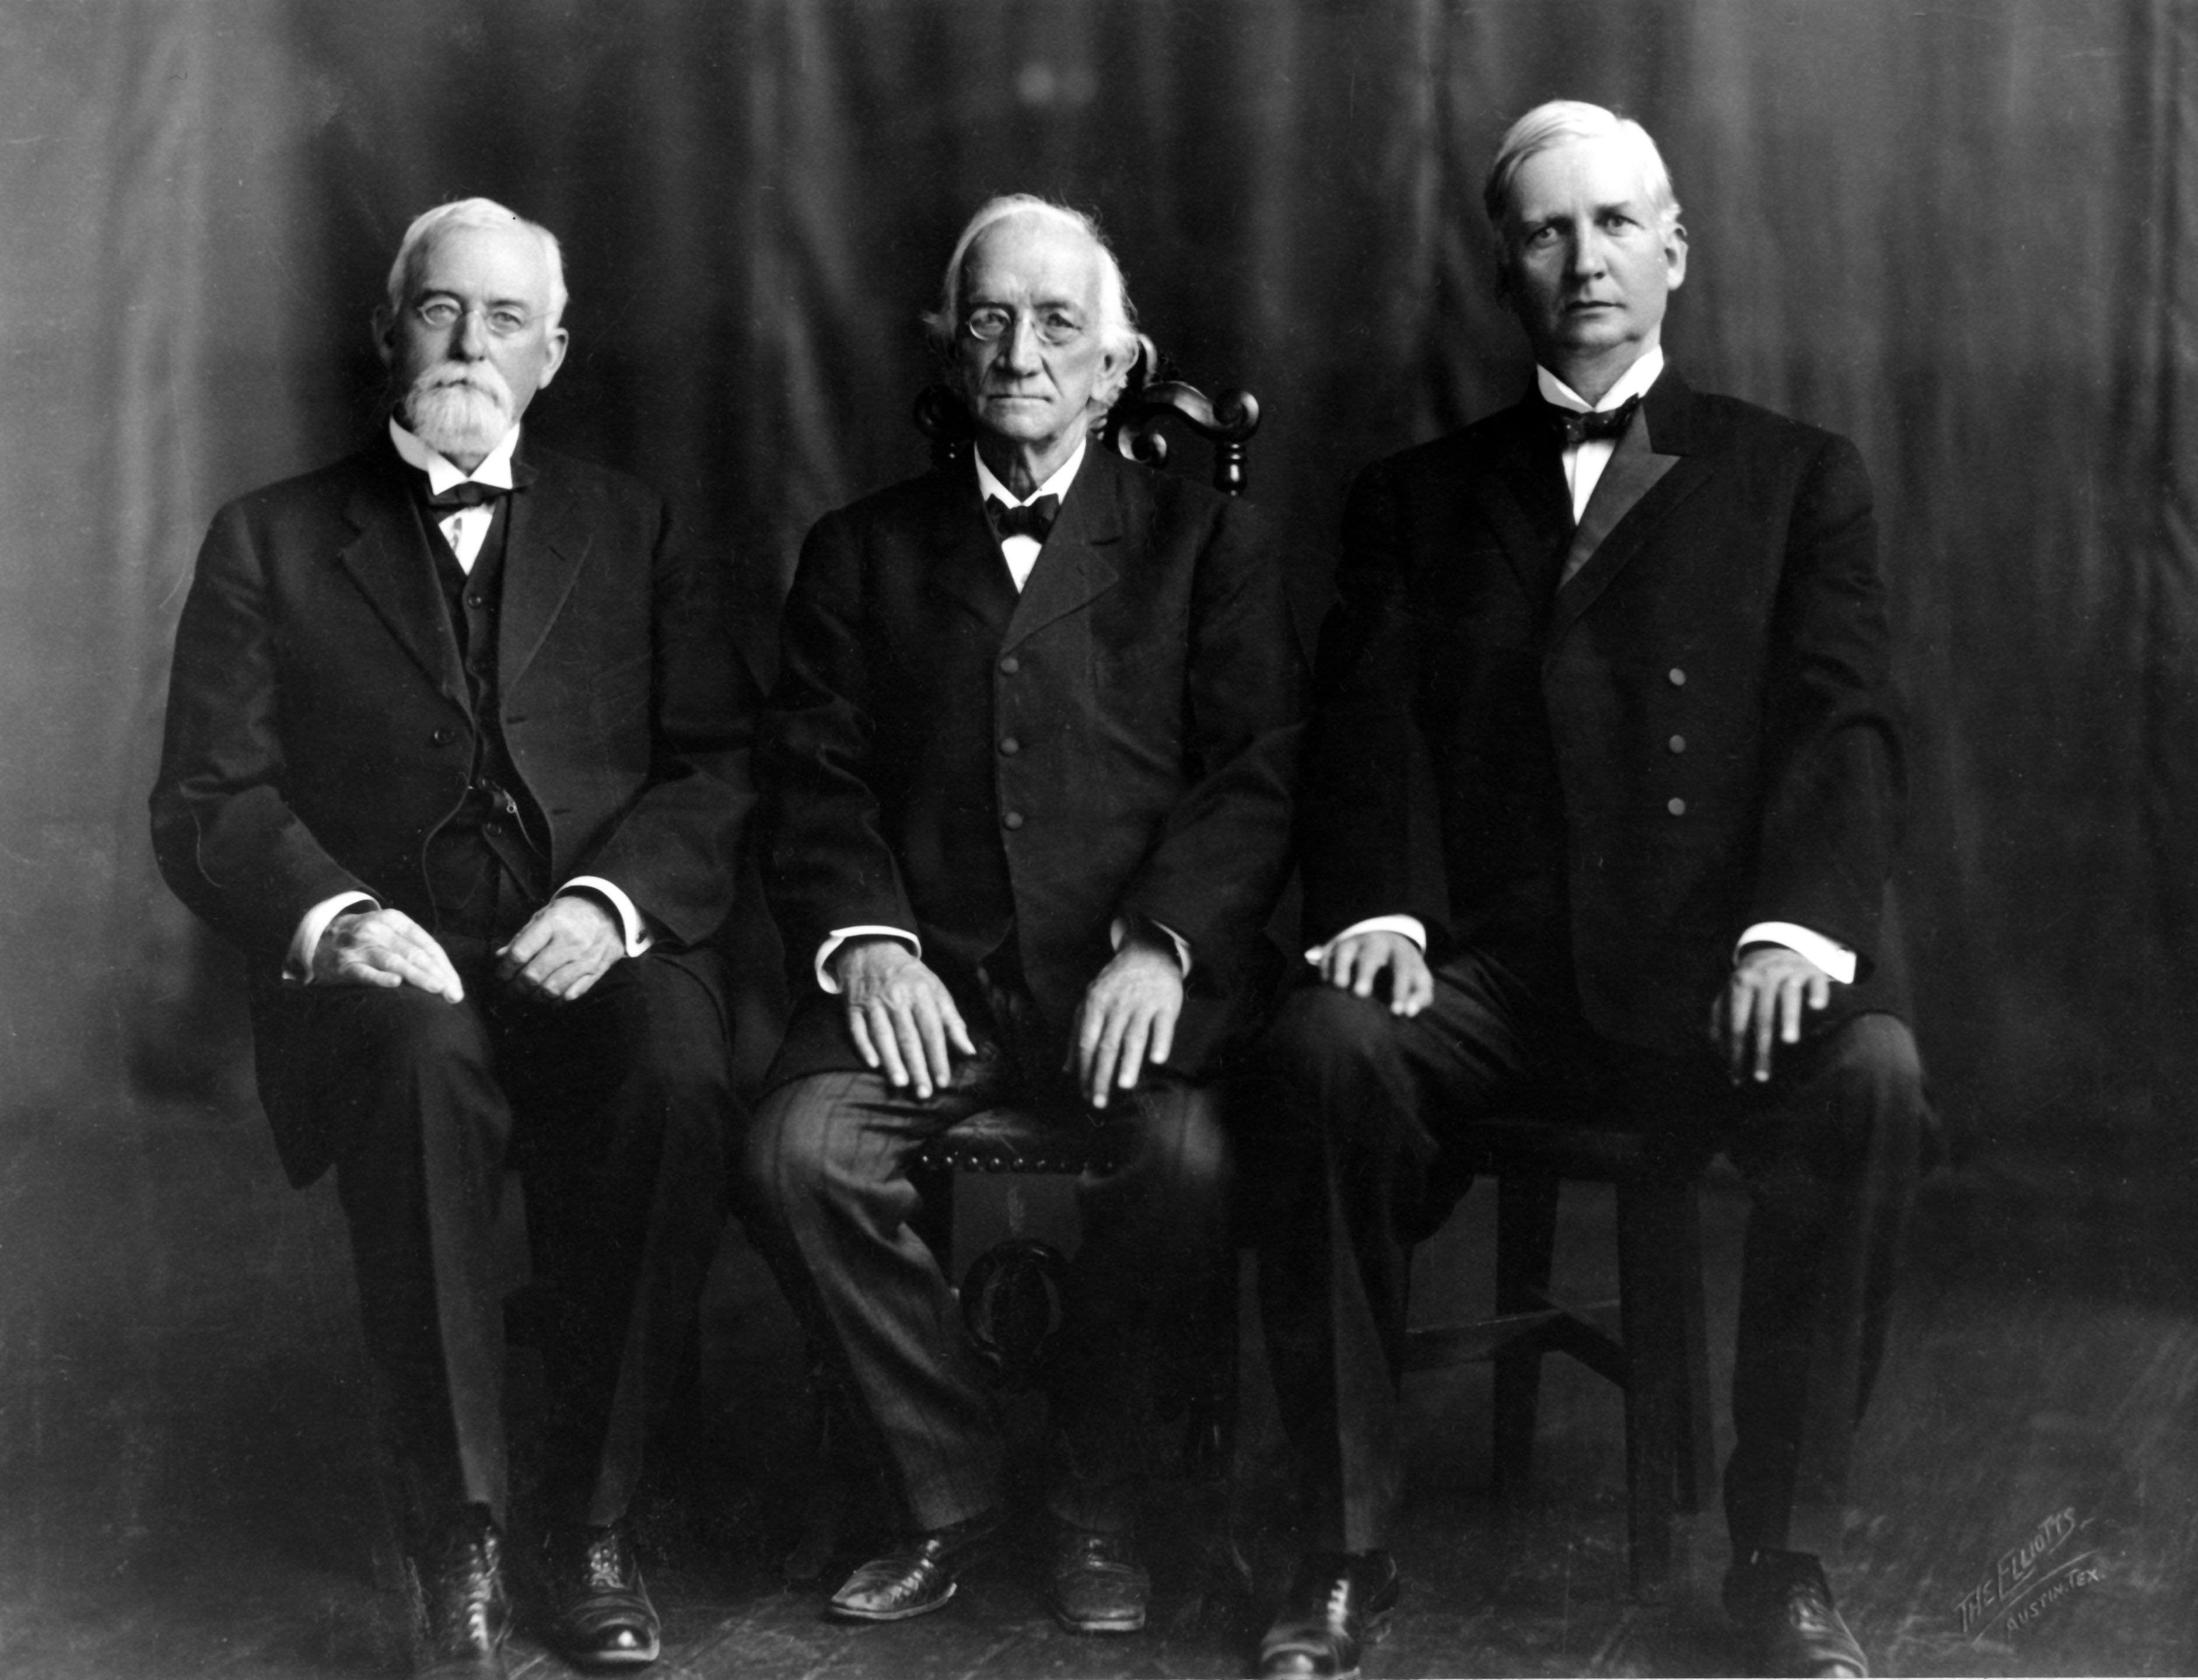 Left to Right: Justice Frank A. Williams, Chief Justice Thomas J. Brown, Justice William F. Ramsey, 1911. Photo: Texas Supreme Court Archives.